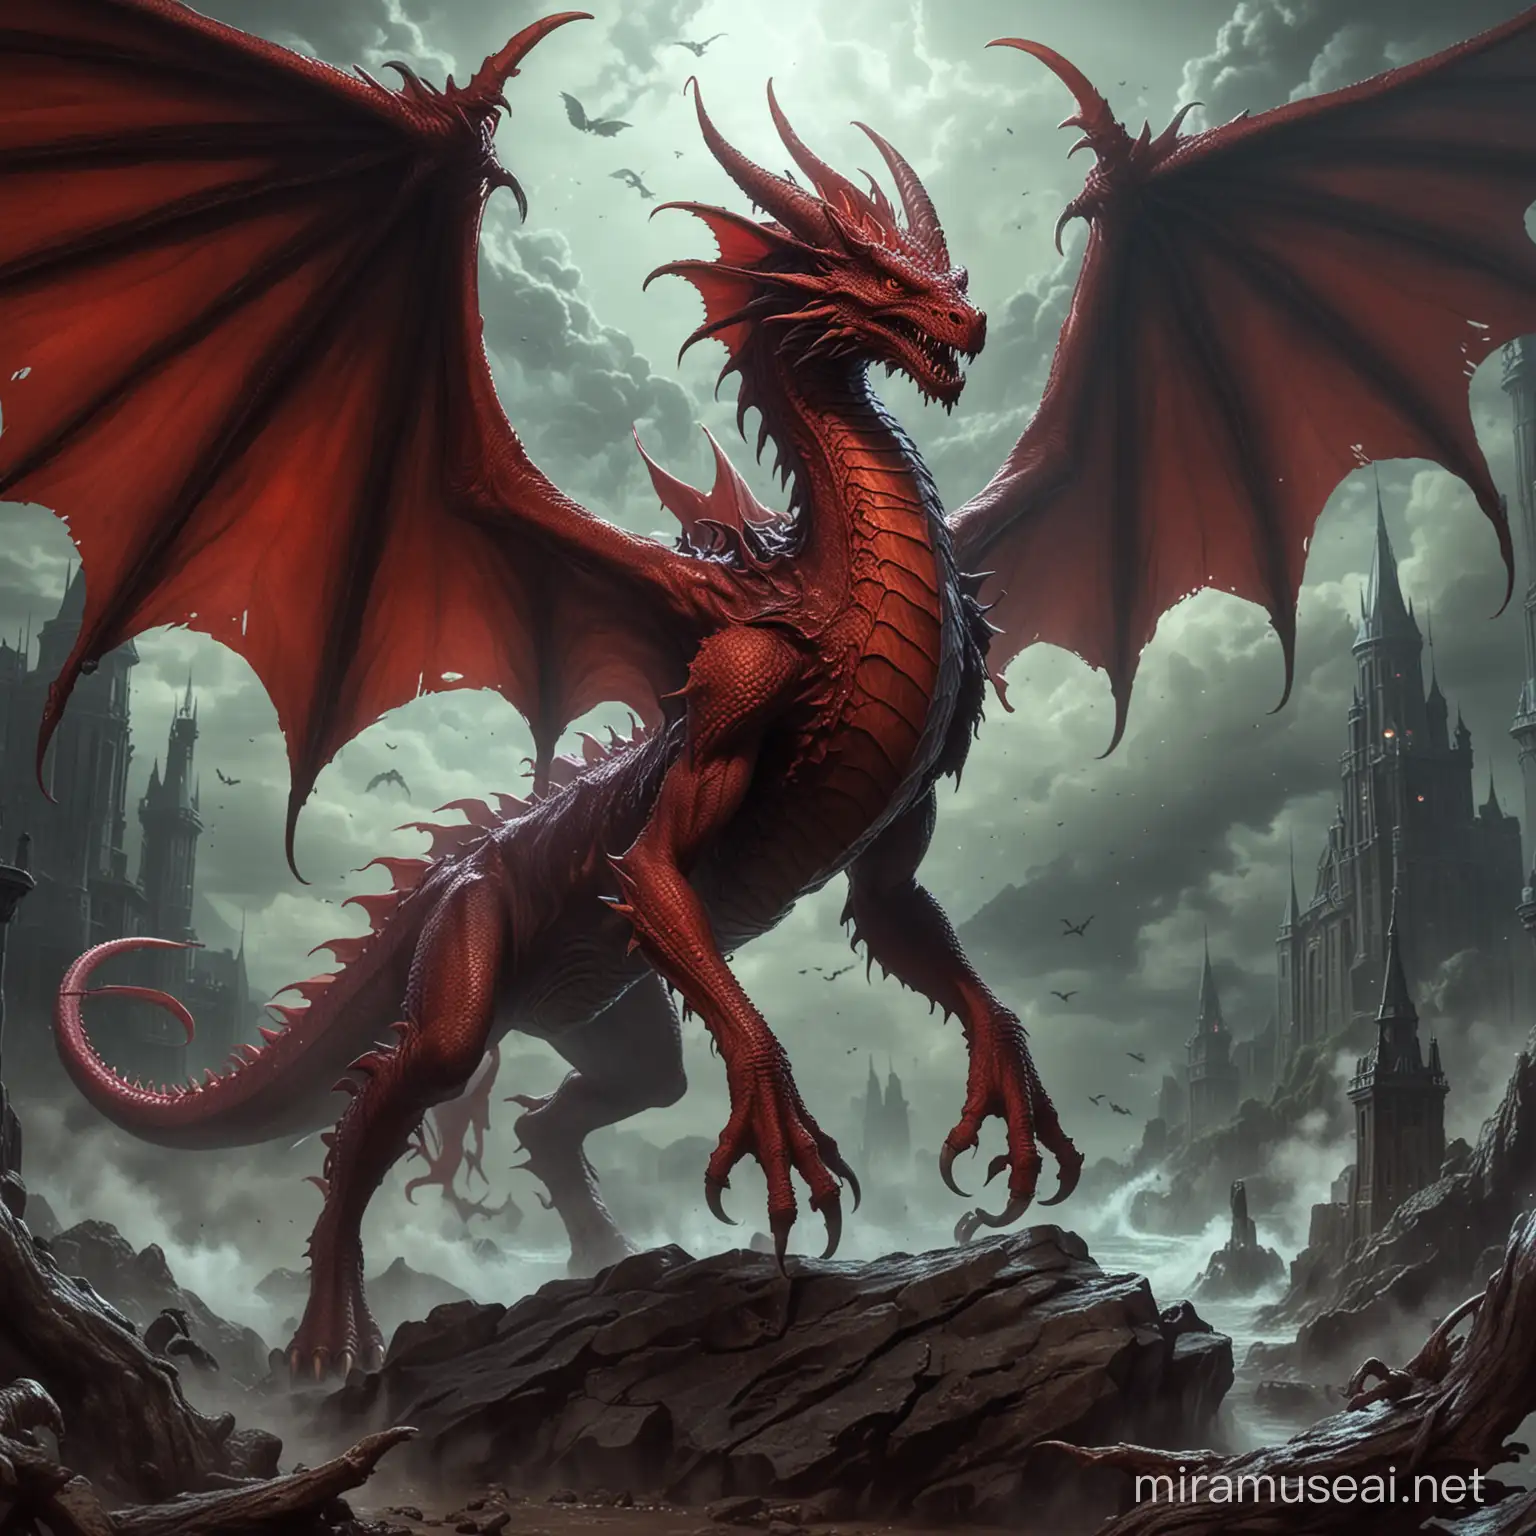 Eldritch Red Dragon with AnimeInspired Features